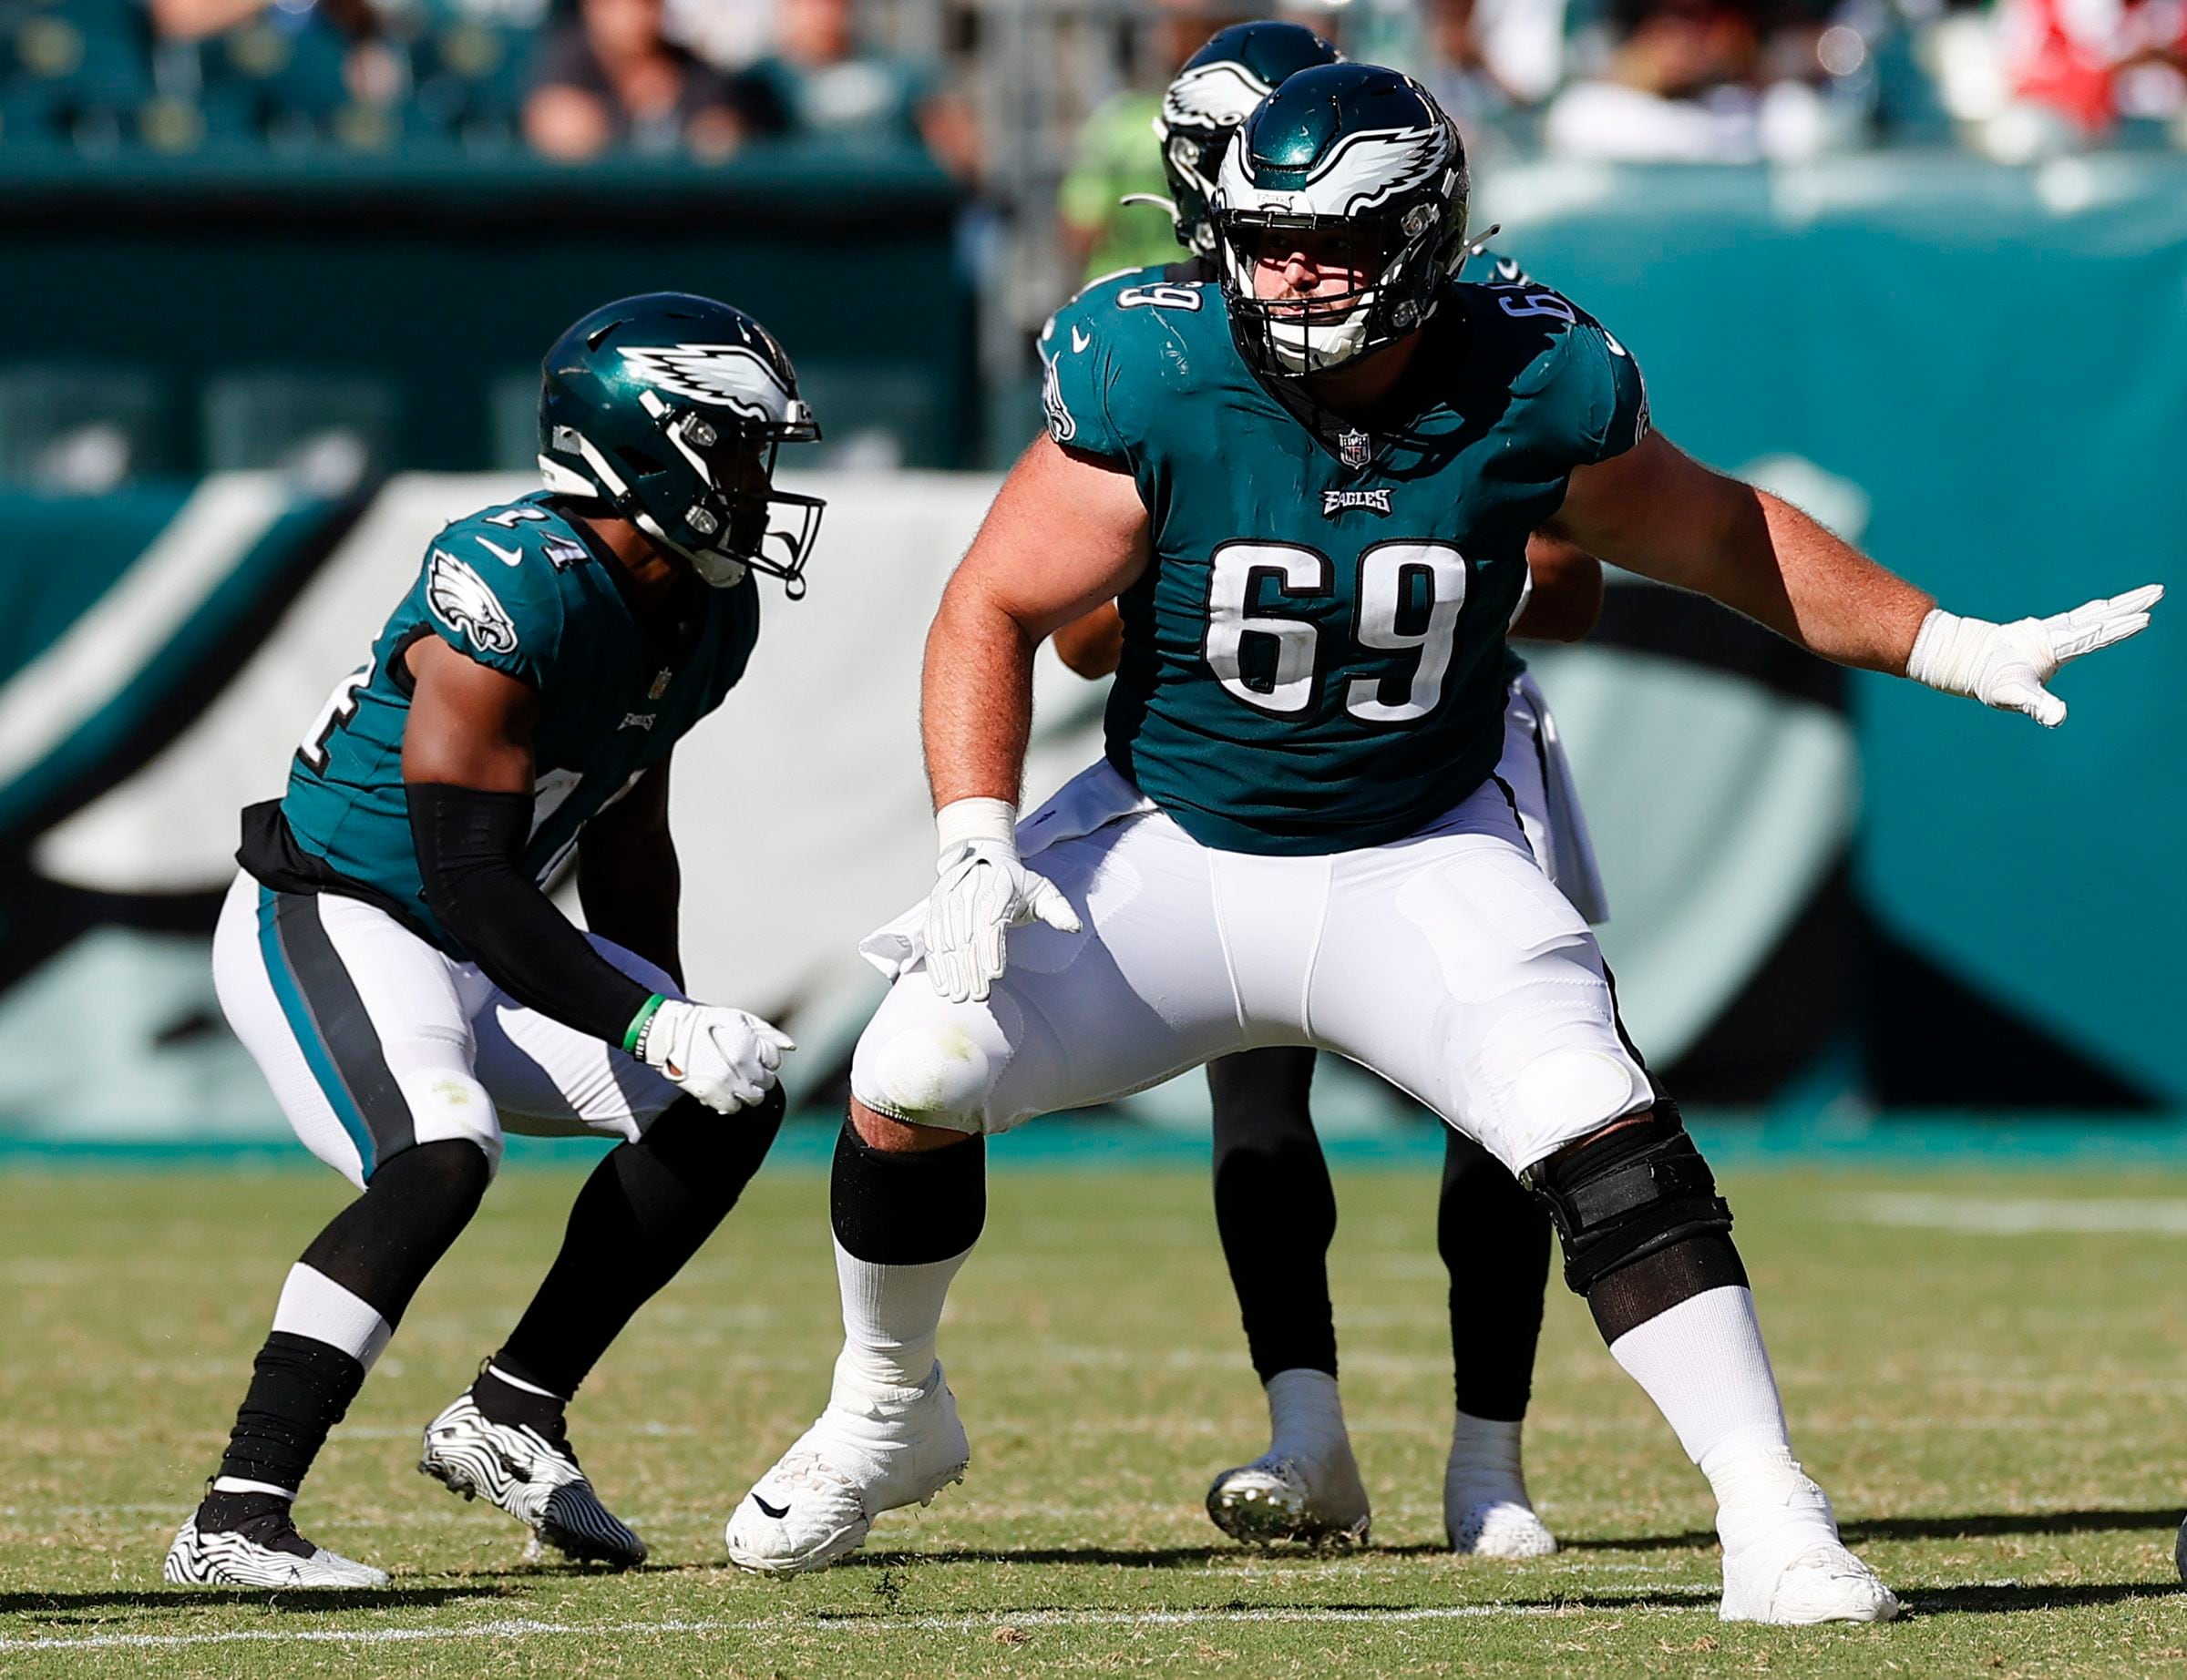 Eagles rookie lineman Landon Dickerson to start at right guard